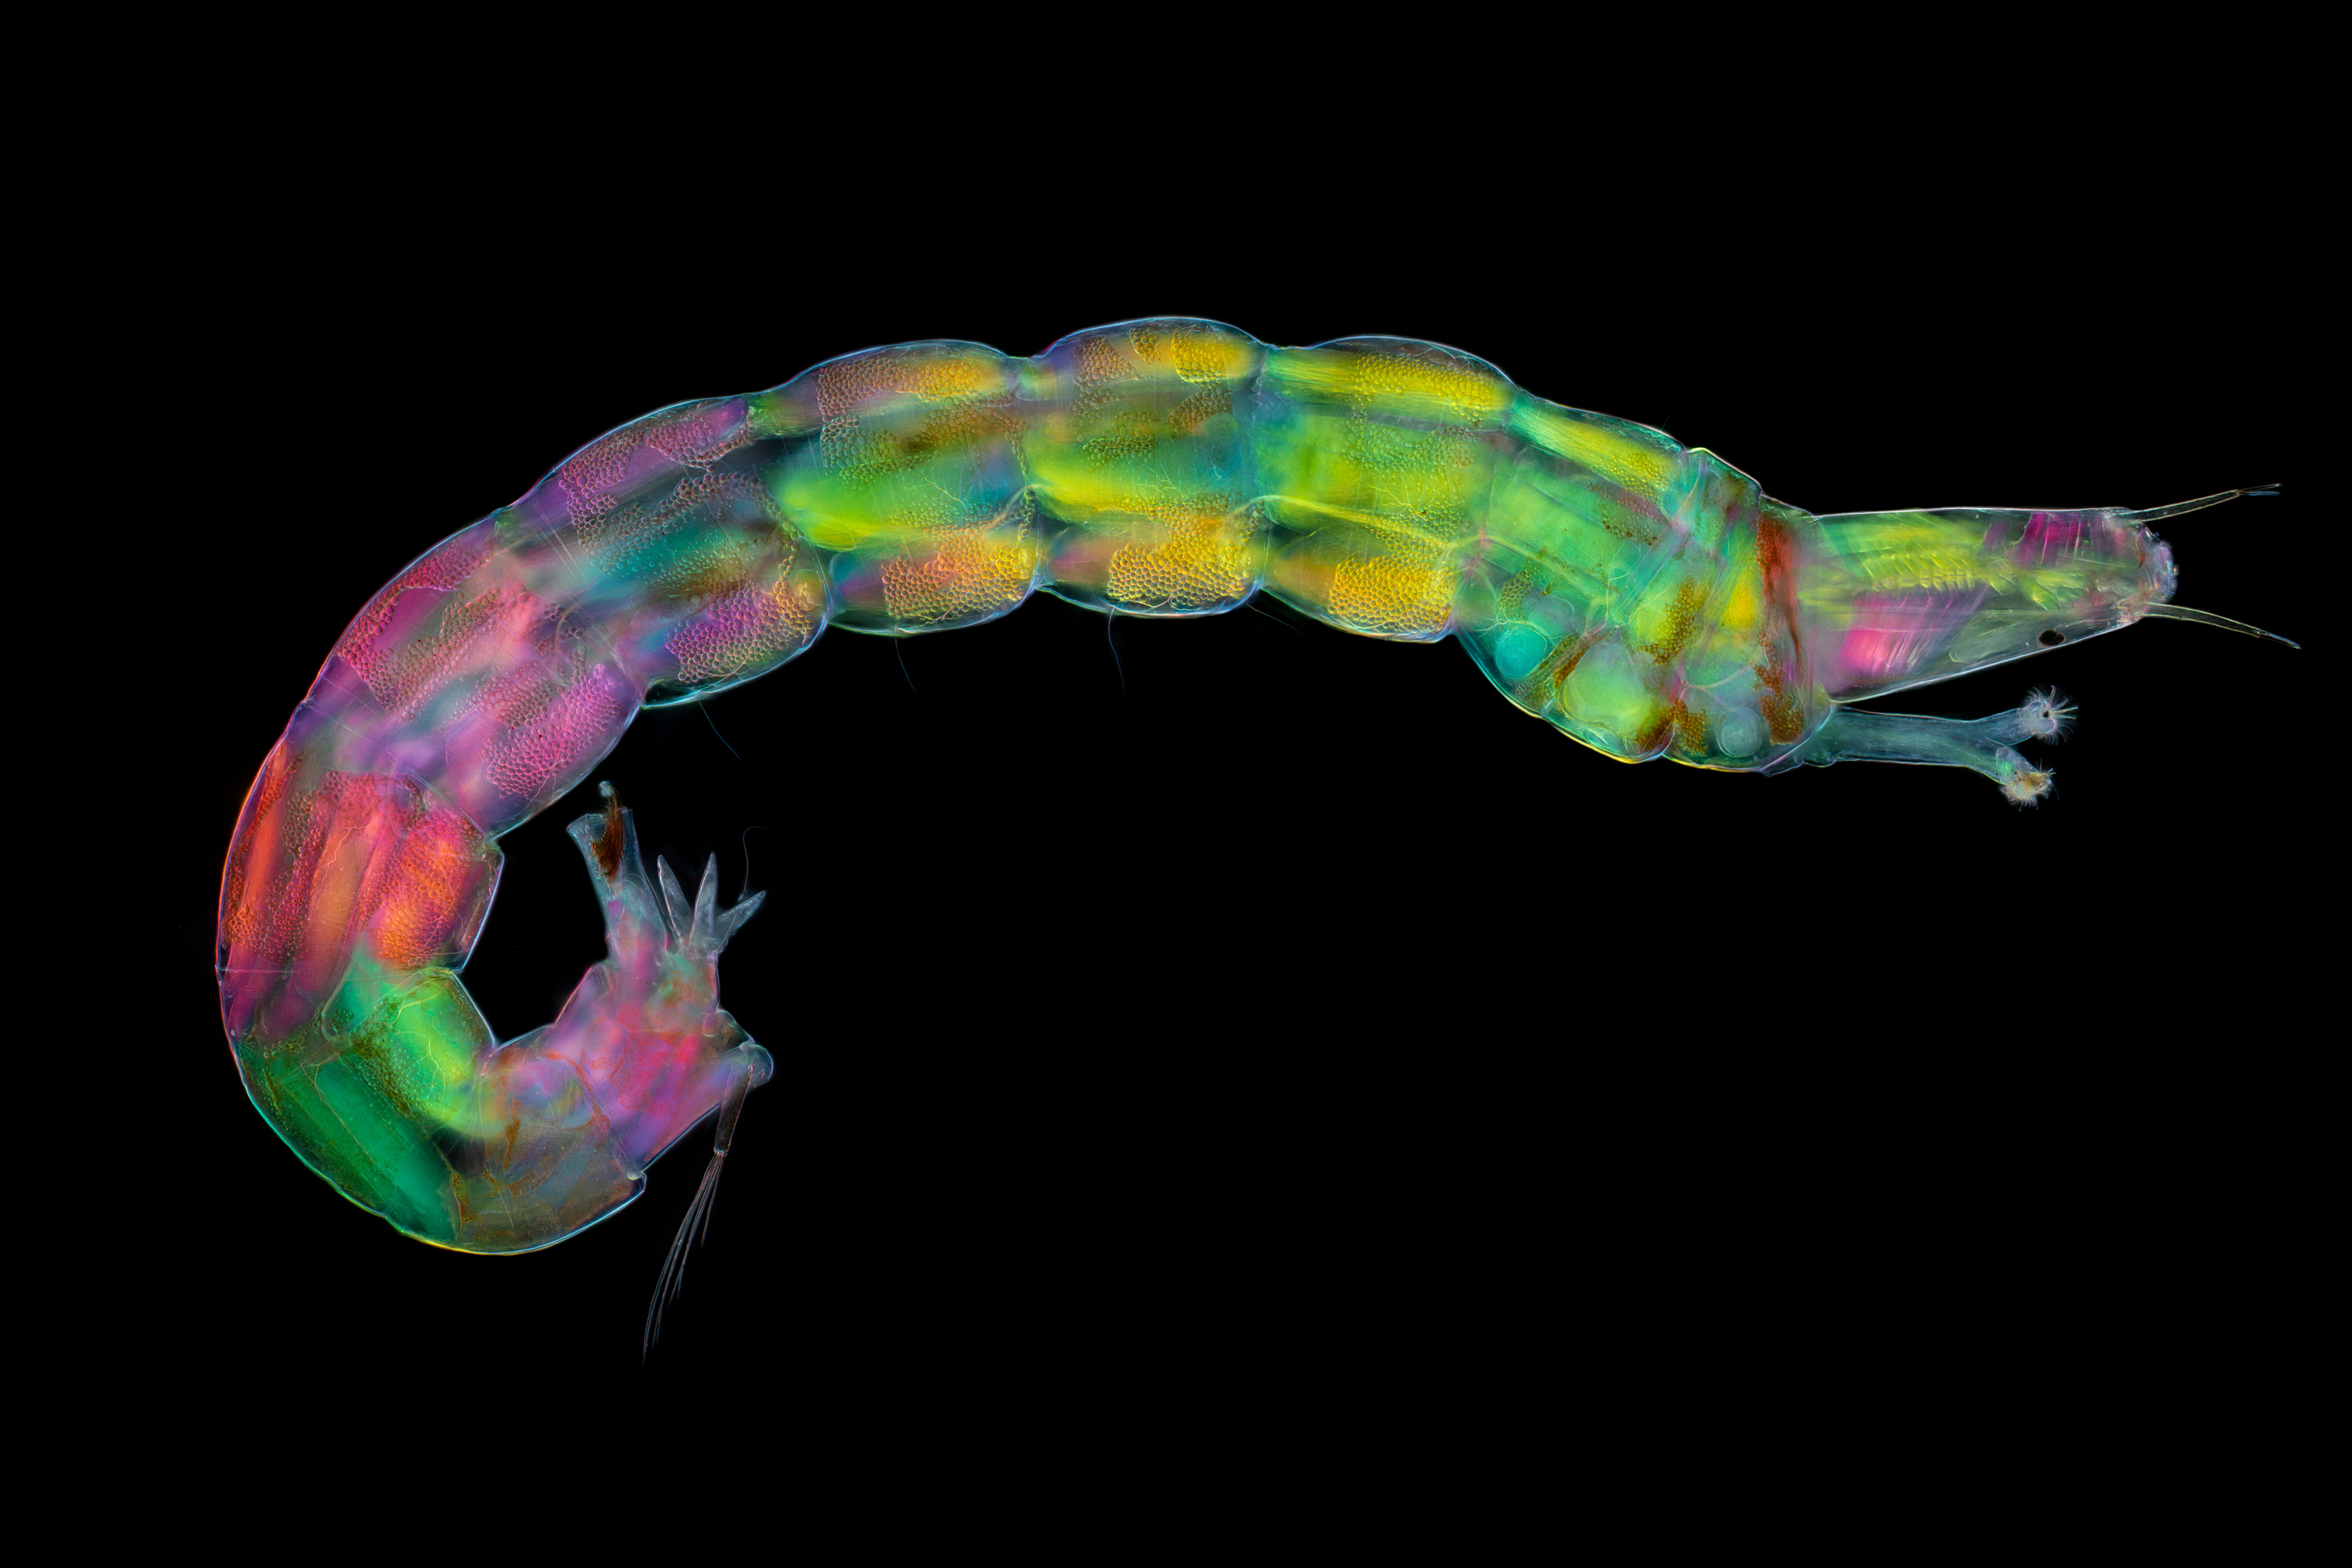 A freshwater midge larva at 10 times the magnification.